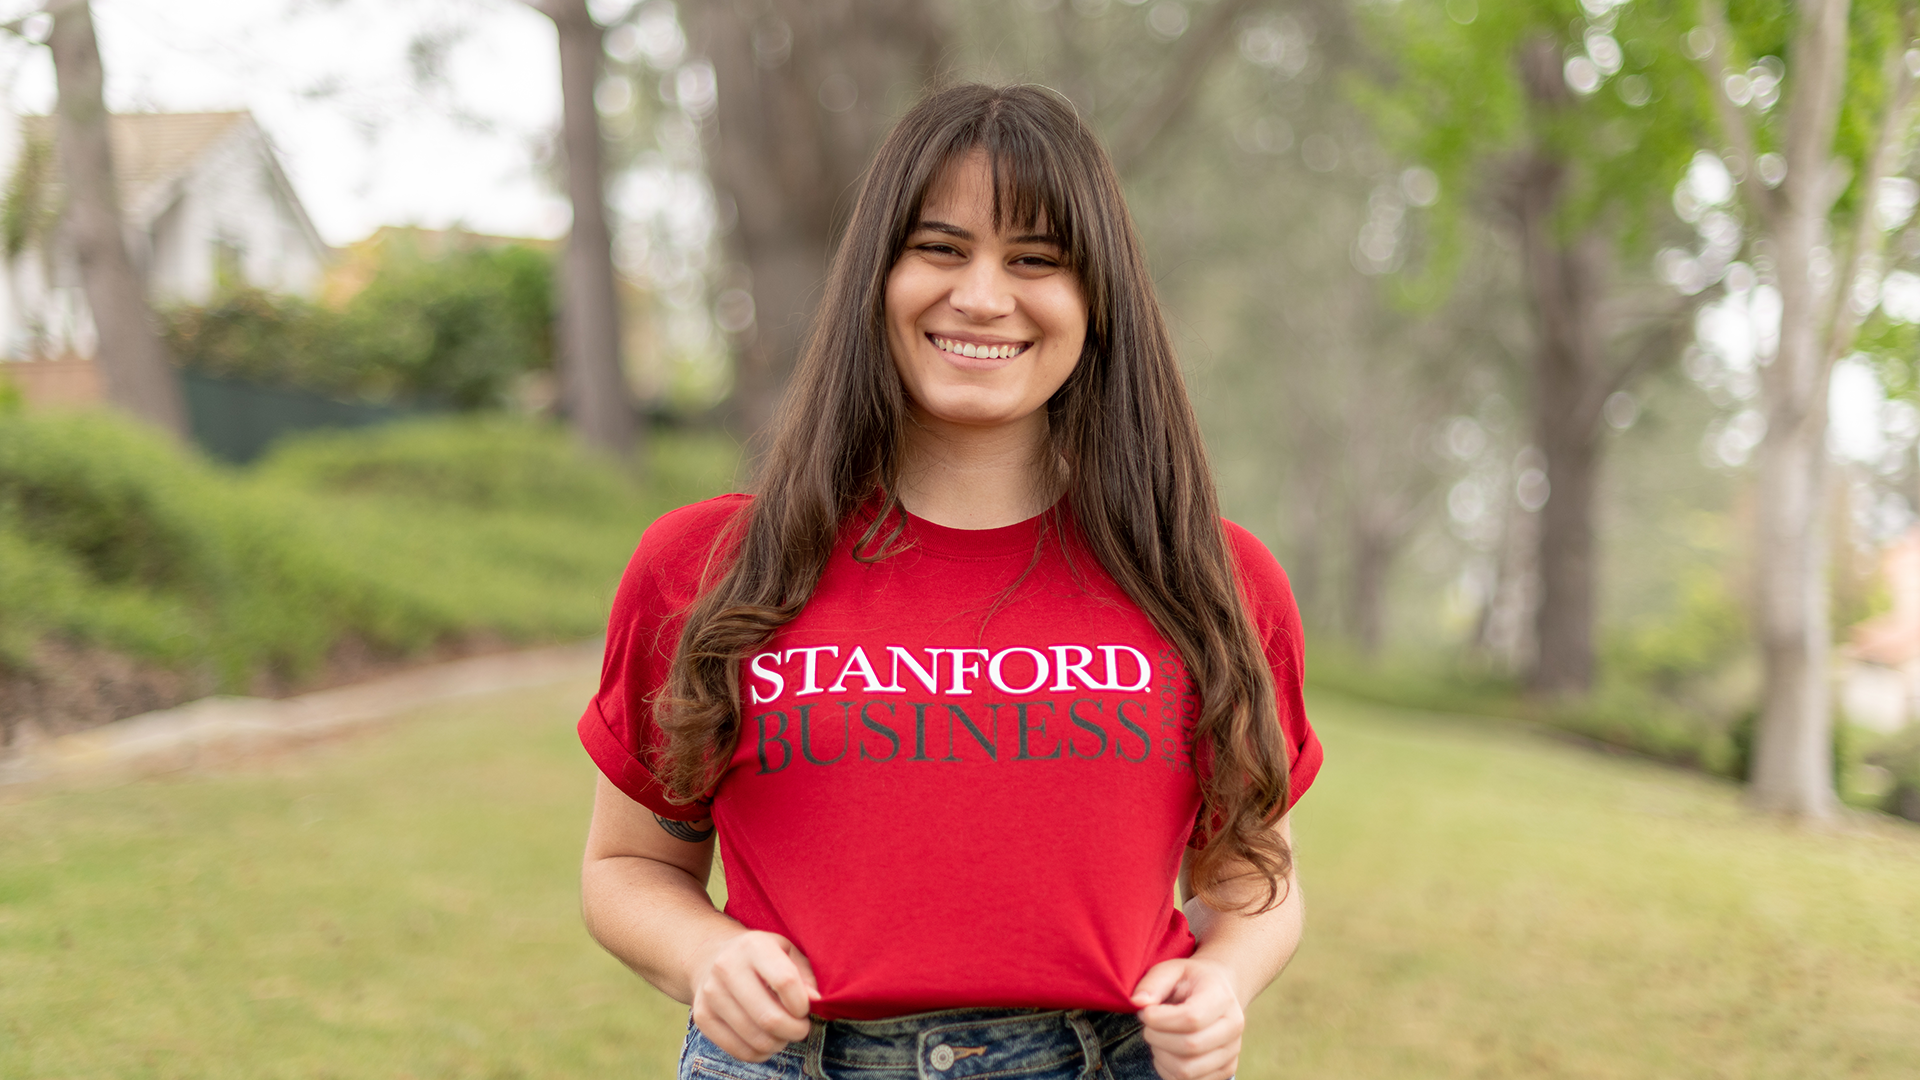 Woman with long brown hair shows off her red Stanford Business school t-shirt outside